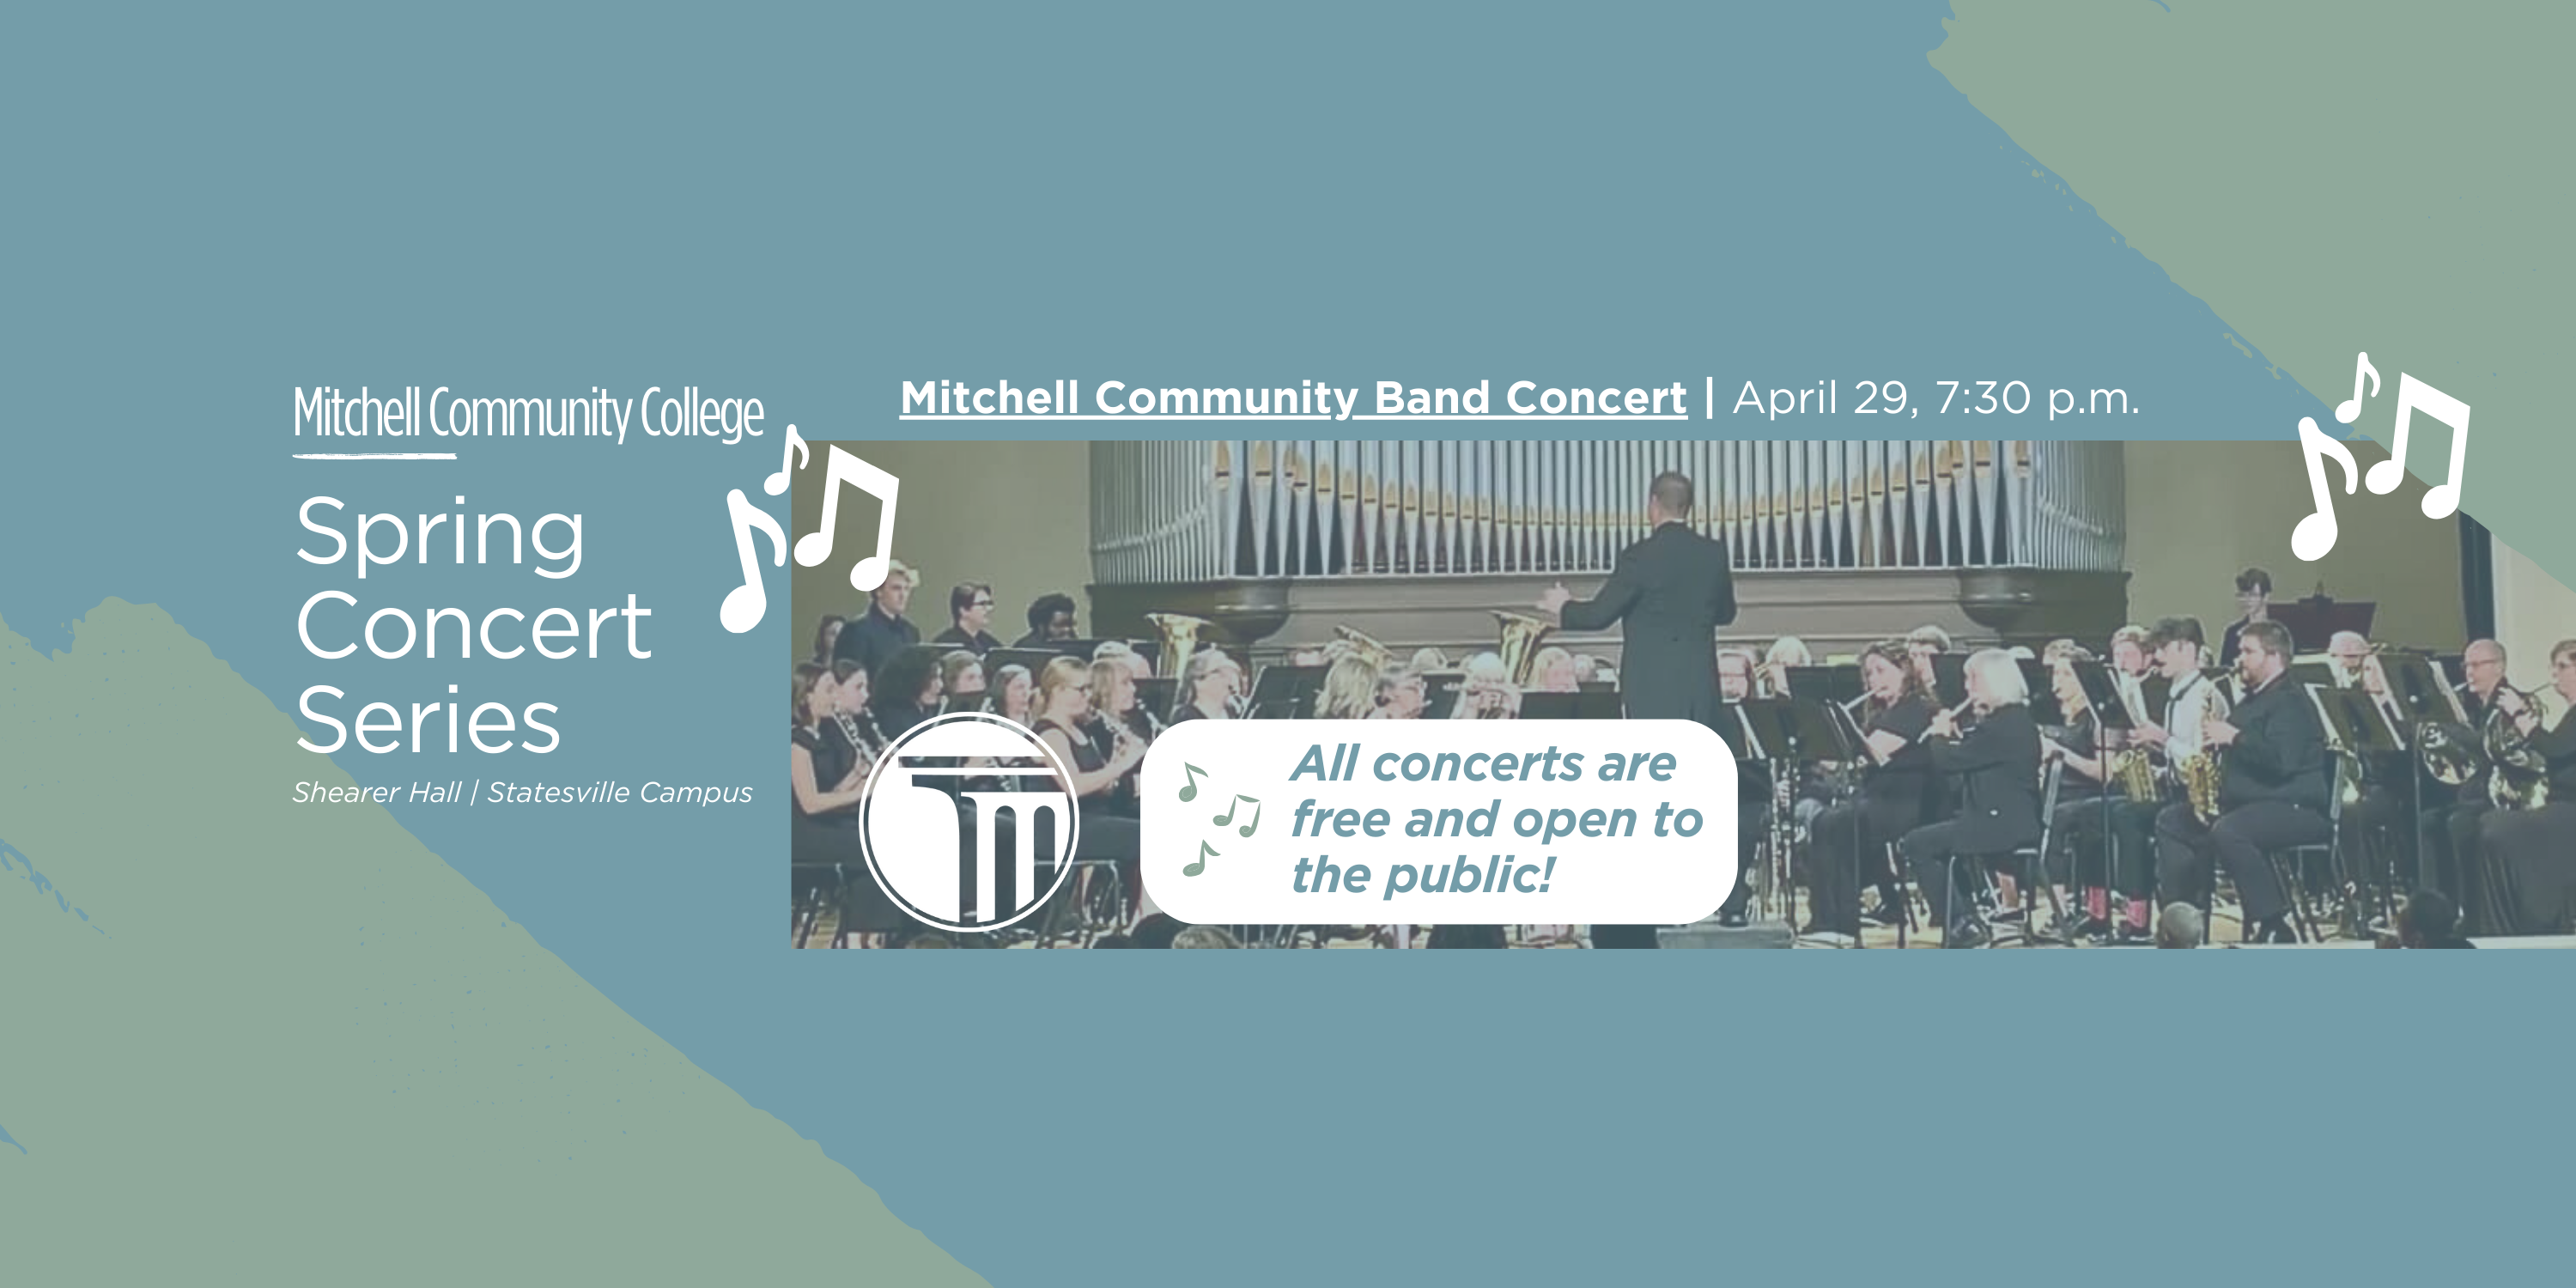 Banner that reads "Mitchell Community College Spring Concert Series | Shearer Hall | Statesville Campus | Mitchell Community Band Concert - April 29, 7:30 p.m. | Spring Choral Concert - May 7, 7:30 p.m. | All concerts are free and open to the public!". Click the banner to learn more.